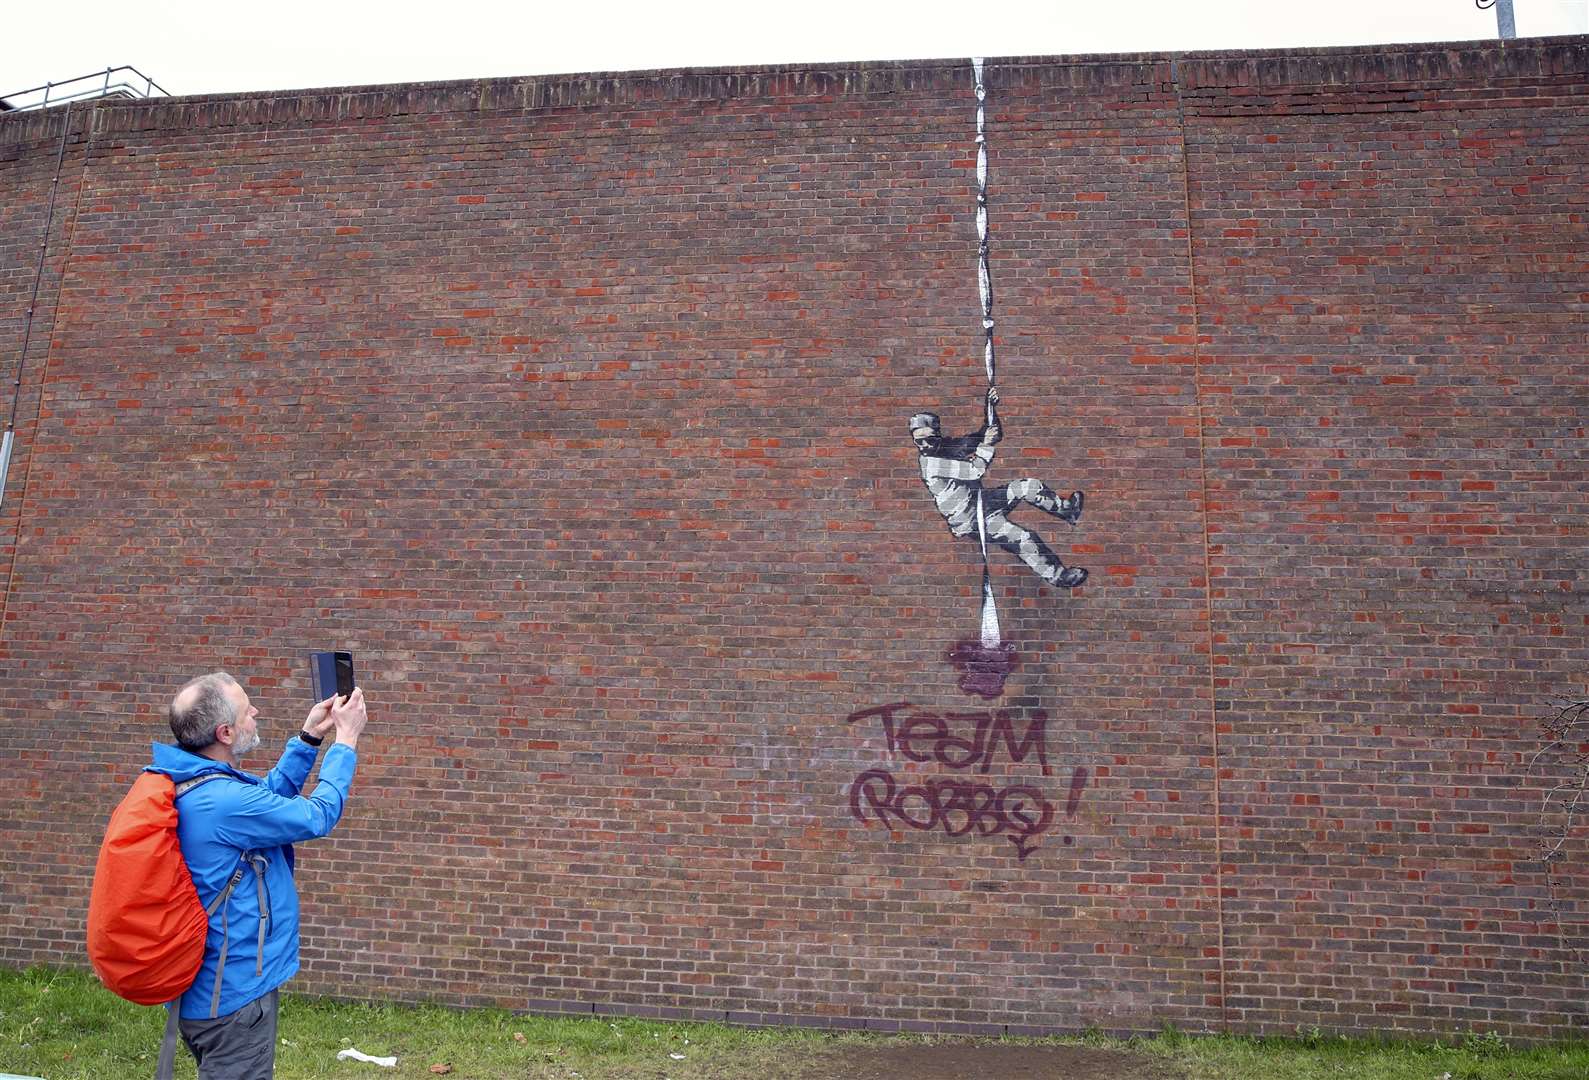 The Banksy artwork which was painted on the side of the former prison in Reading has now been defaced (Steve Parsons/PA)